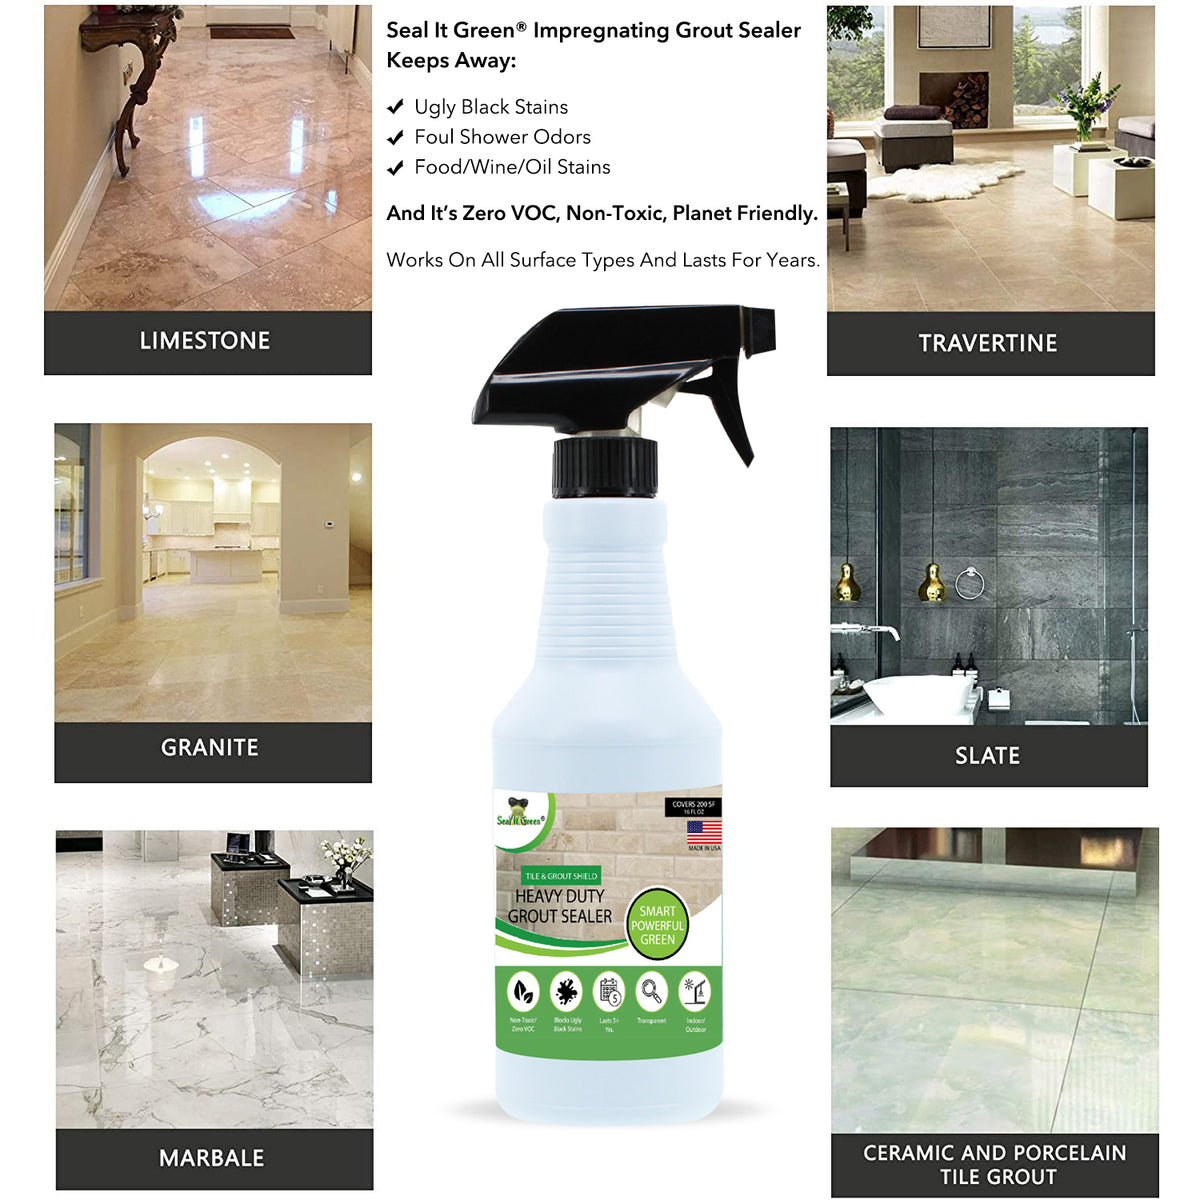 Grout Sealer Uses